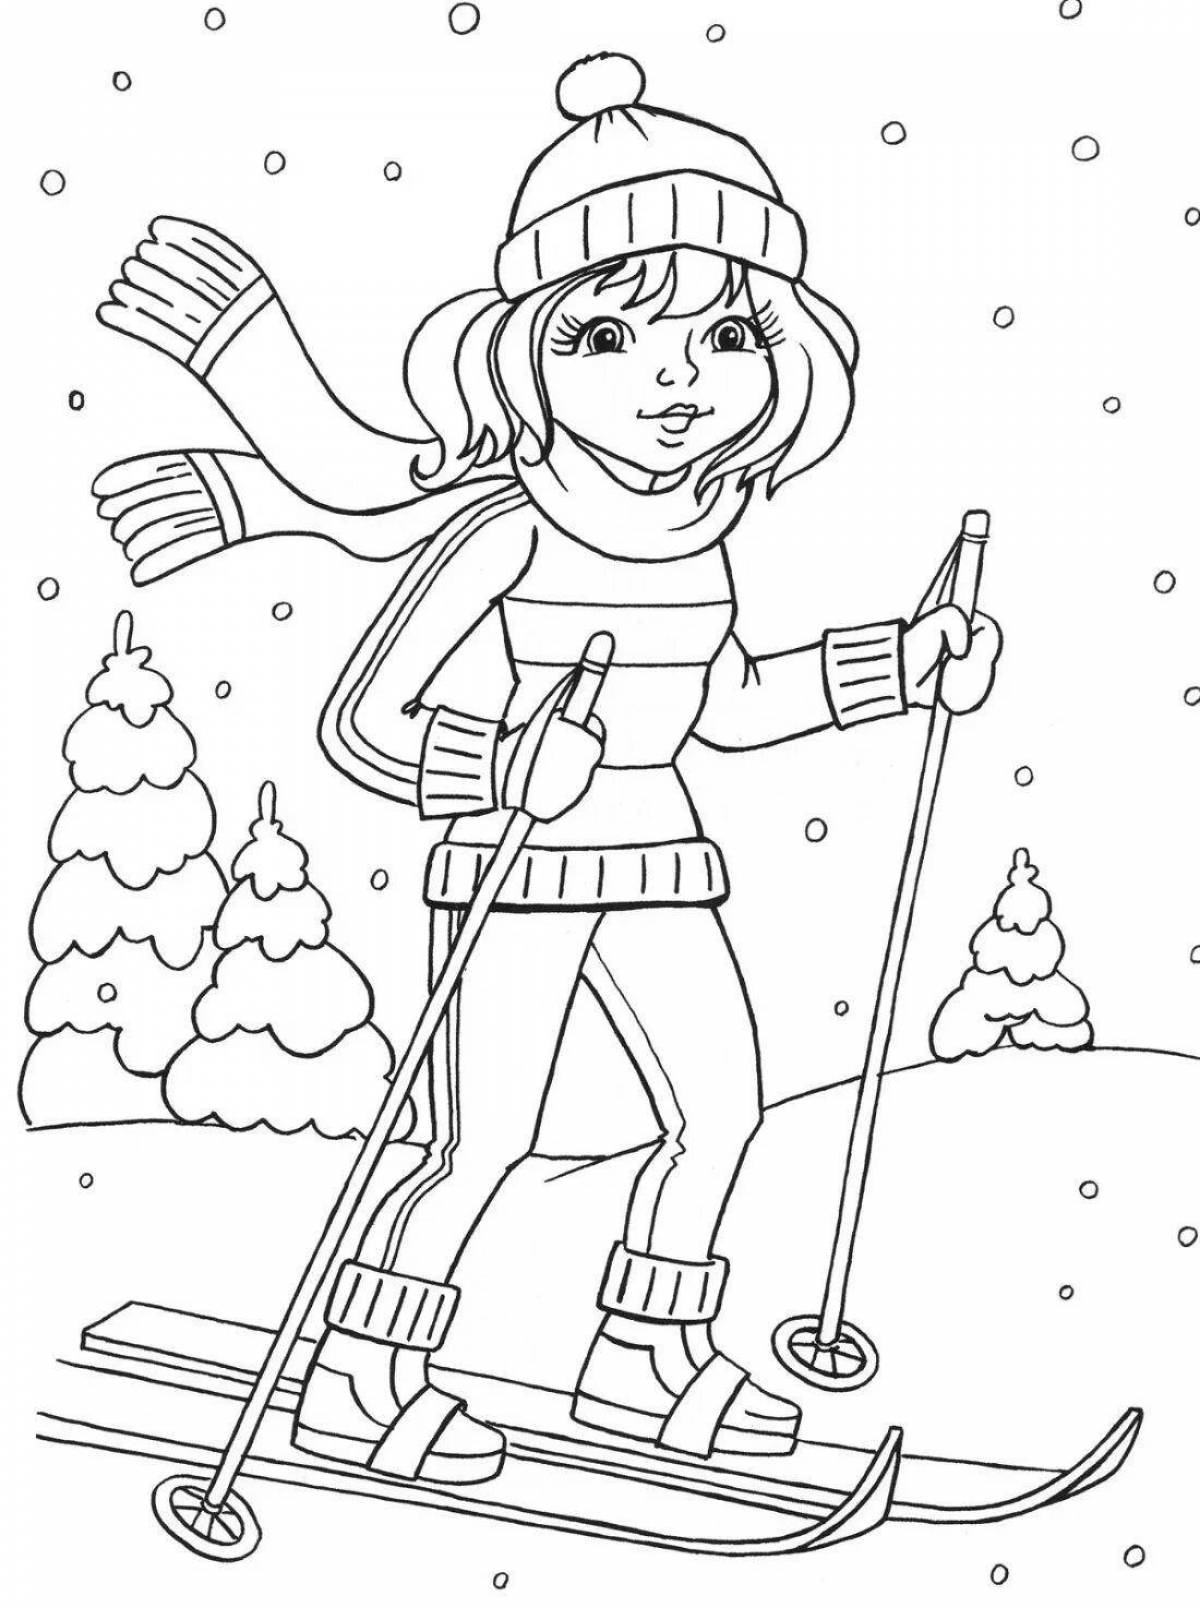 Glorious winter sports coloring page for kindergarten